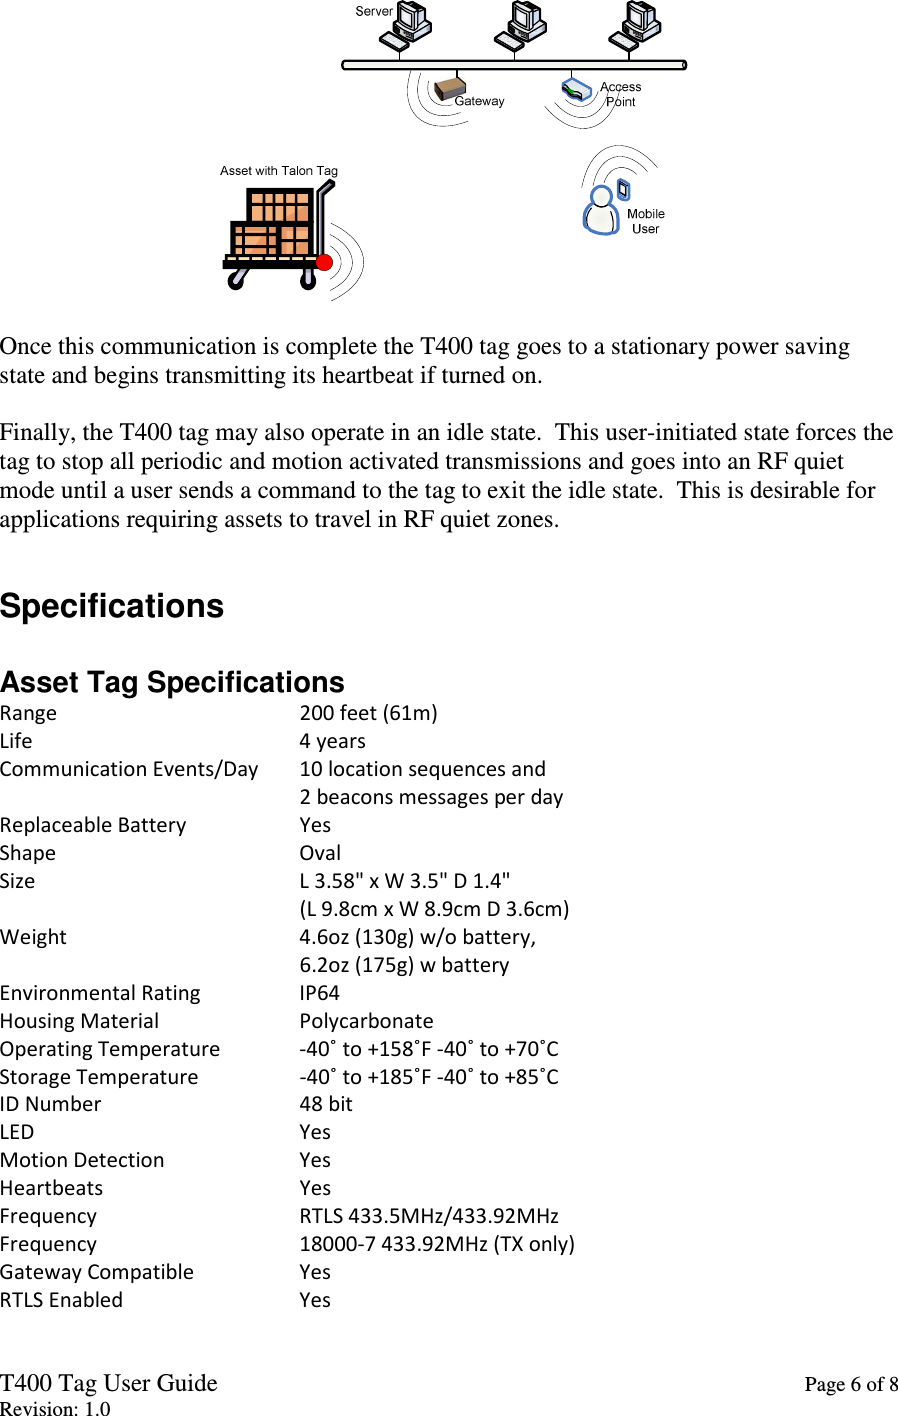 T400 Tag User Guide    Page 6 of 8 Revision: 1.0   Once this communication is complete the T400 tag goes to a stationary power saving state and begins transmitting its heartbeat if turned on.  Finally, the T400 tag may also operate in an idle state.  This user-initiated state forces the tag to stop all periodic and motion activated transmissions and goes into an RF quiet mode until a user sends a command to the tag to exit the idle state.  This is desirable for applications requiring assets to travel in RF quiet zones.  Specifications  Asset Tag Specifications Range         200 feet (61m) Life         4 years Communication Events/Day   10 location sequences and 2 beacons messages per day Replaceable Battery     Yes Shape         Oval Size         L 3.58&quot; x W 3.5&quot; D 1.4&quot; (L 9.8cm x W 8.9cm D 3.6cm) Weight        4.6oz (130g) w/o battery, 6.2oz (175g) w battery Environmental Rating     IP64 Housing Material     Polycarbonate Operating Temperature   -40˚ to +158˚F -40˚ to +70˚C Storage Temperature     -40˚ to +185˚F -40˚ to +85˚C ID Number       48 bit LED         Yes Motion Detection     Yes Heartbeats       Yes Frequency       RTLS 433.5MHz/433.92MHz Frequency       18000-7 433.92MHz (TX only) Gateway Compatible     Yes RTLS Enabled       Yes 